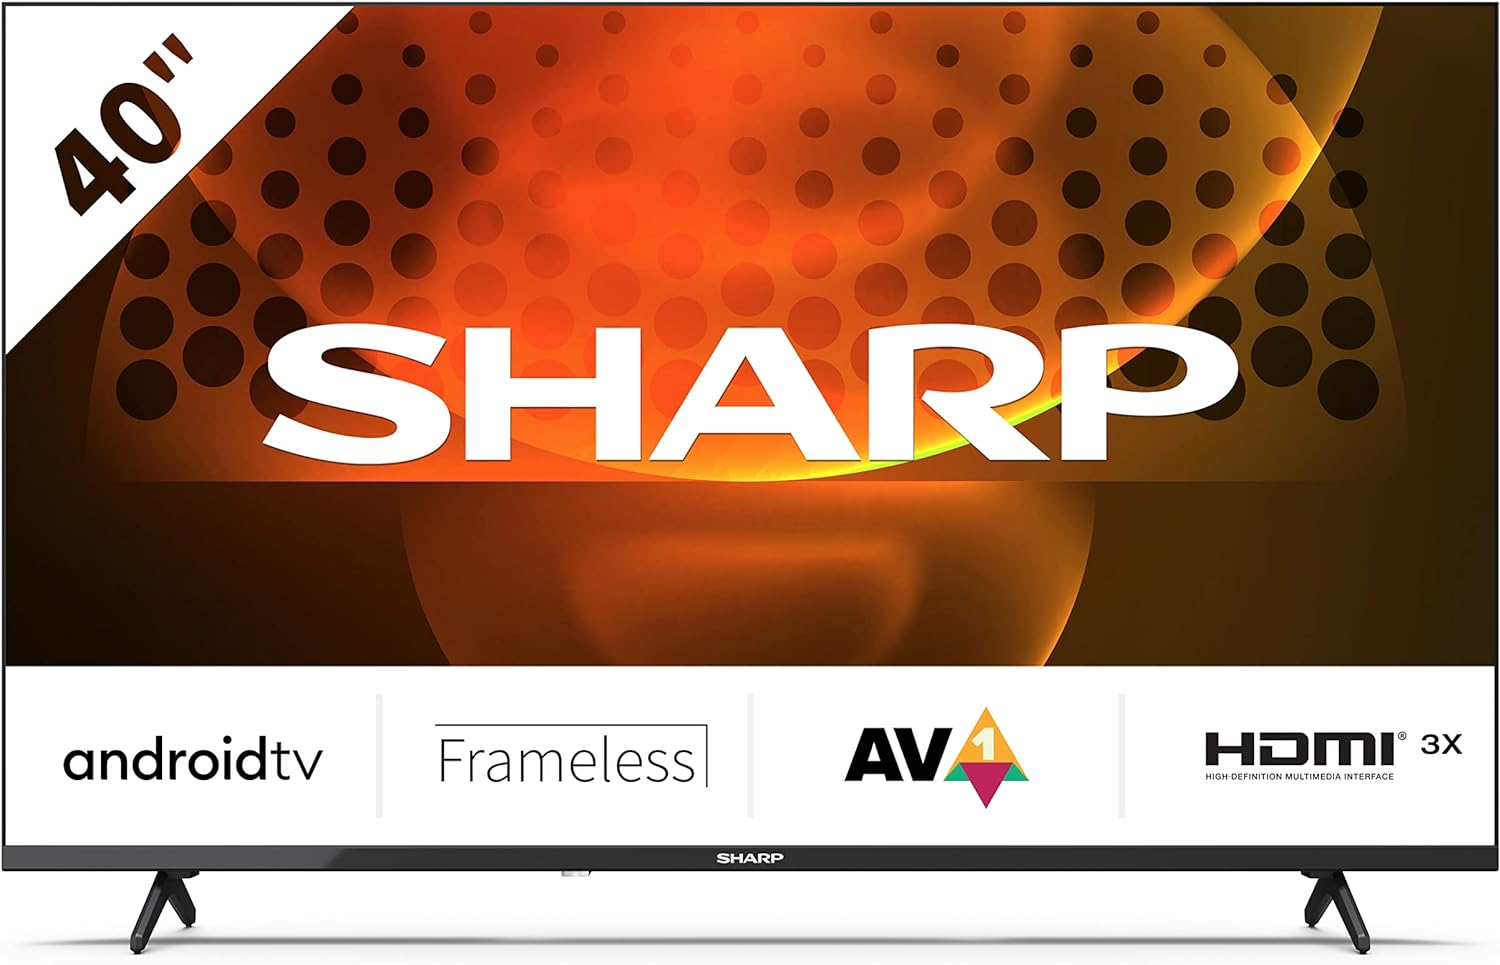 Sharp 2T - C40FH6KL2AB 40 - Inch 2022 FHD Android Smart Frameless LED TV with Freeview Play, 1080p, Dolby Digital, Google Assistant, HD Tuner, Chromecast built - in, 3x HDMI, 2 x USB & Bluetooth – Black - Amazing Gadgets Outlet